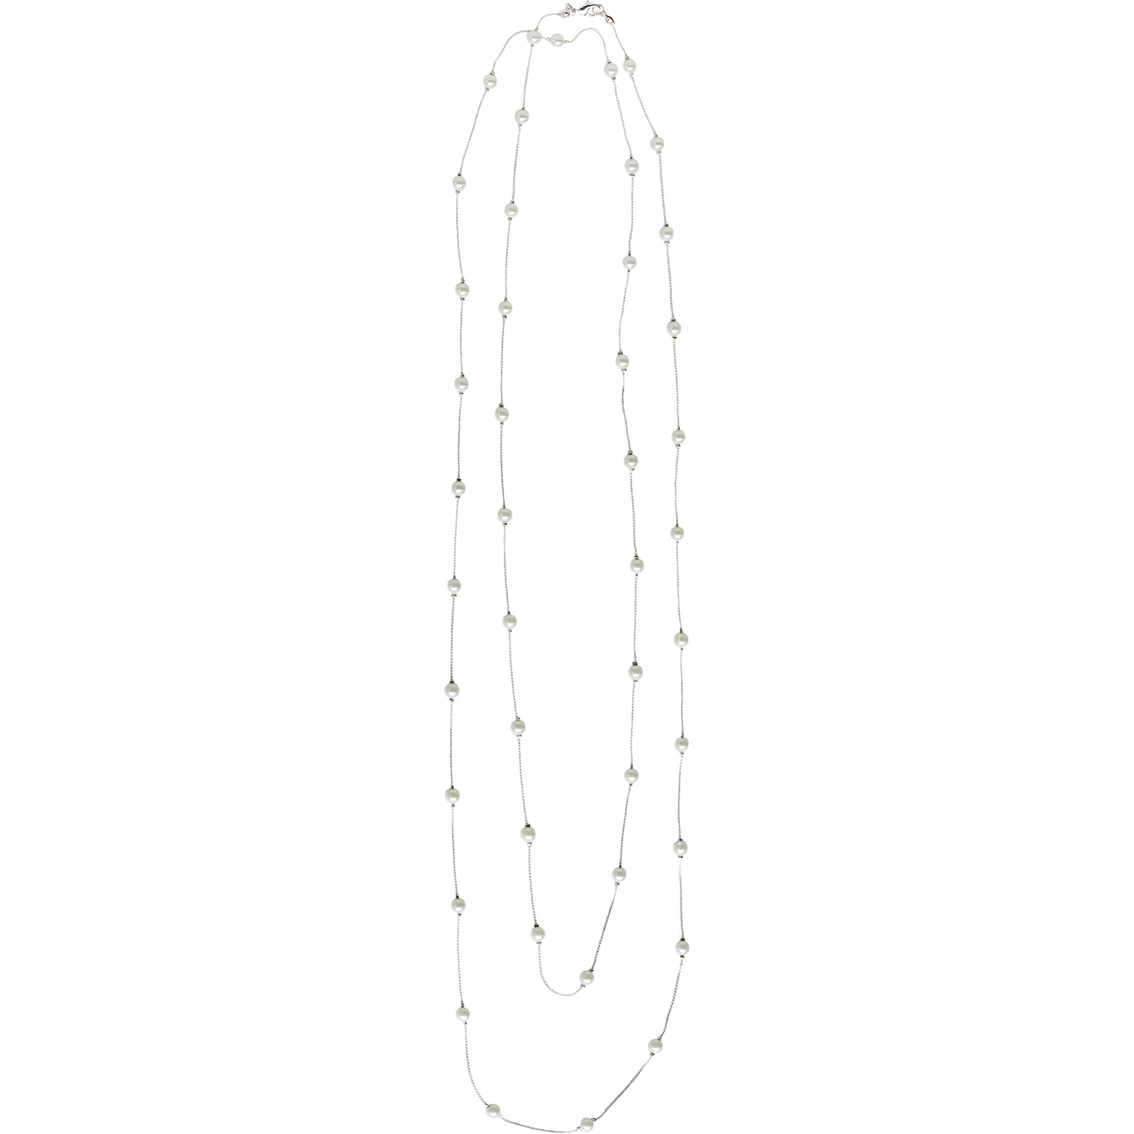 Cherish 6mm White Faux Pearl 72 in. Necklace - Image 2 of 2